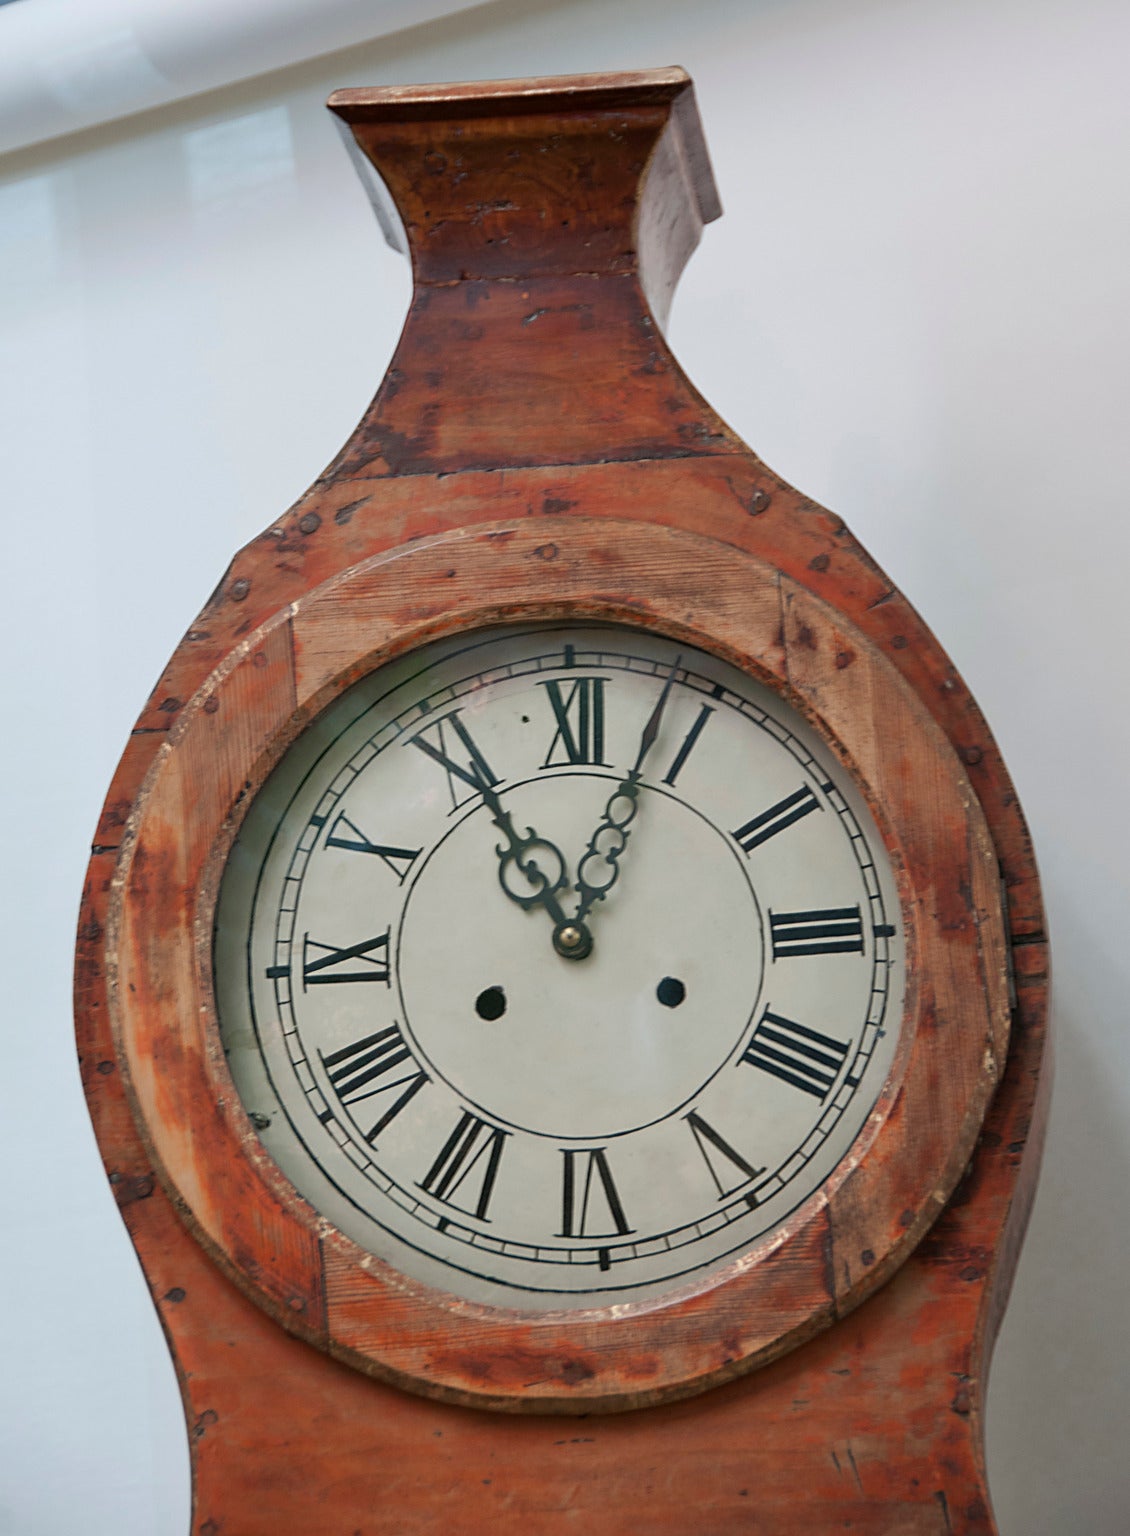 A 19th century Swedish painted tall case clock. Repairs to the base. Many layers of later paint removed to reveal some original paint and pine. Working condition. A nice example of a Provincial piece from circa 1830. We love the color and the